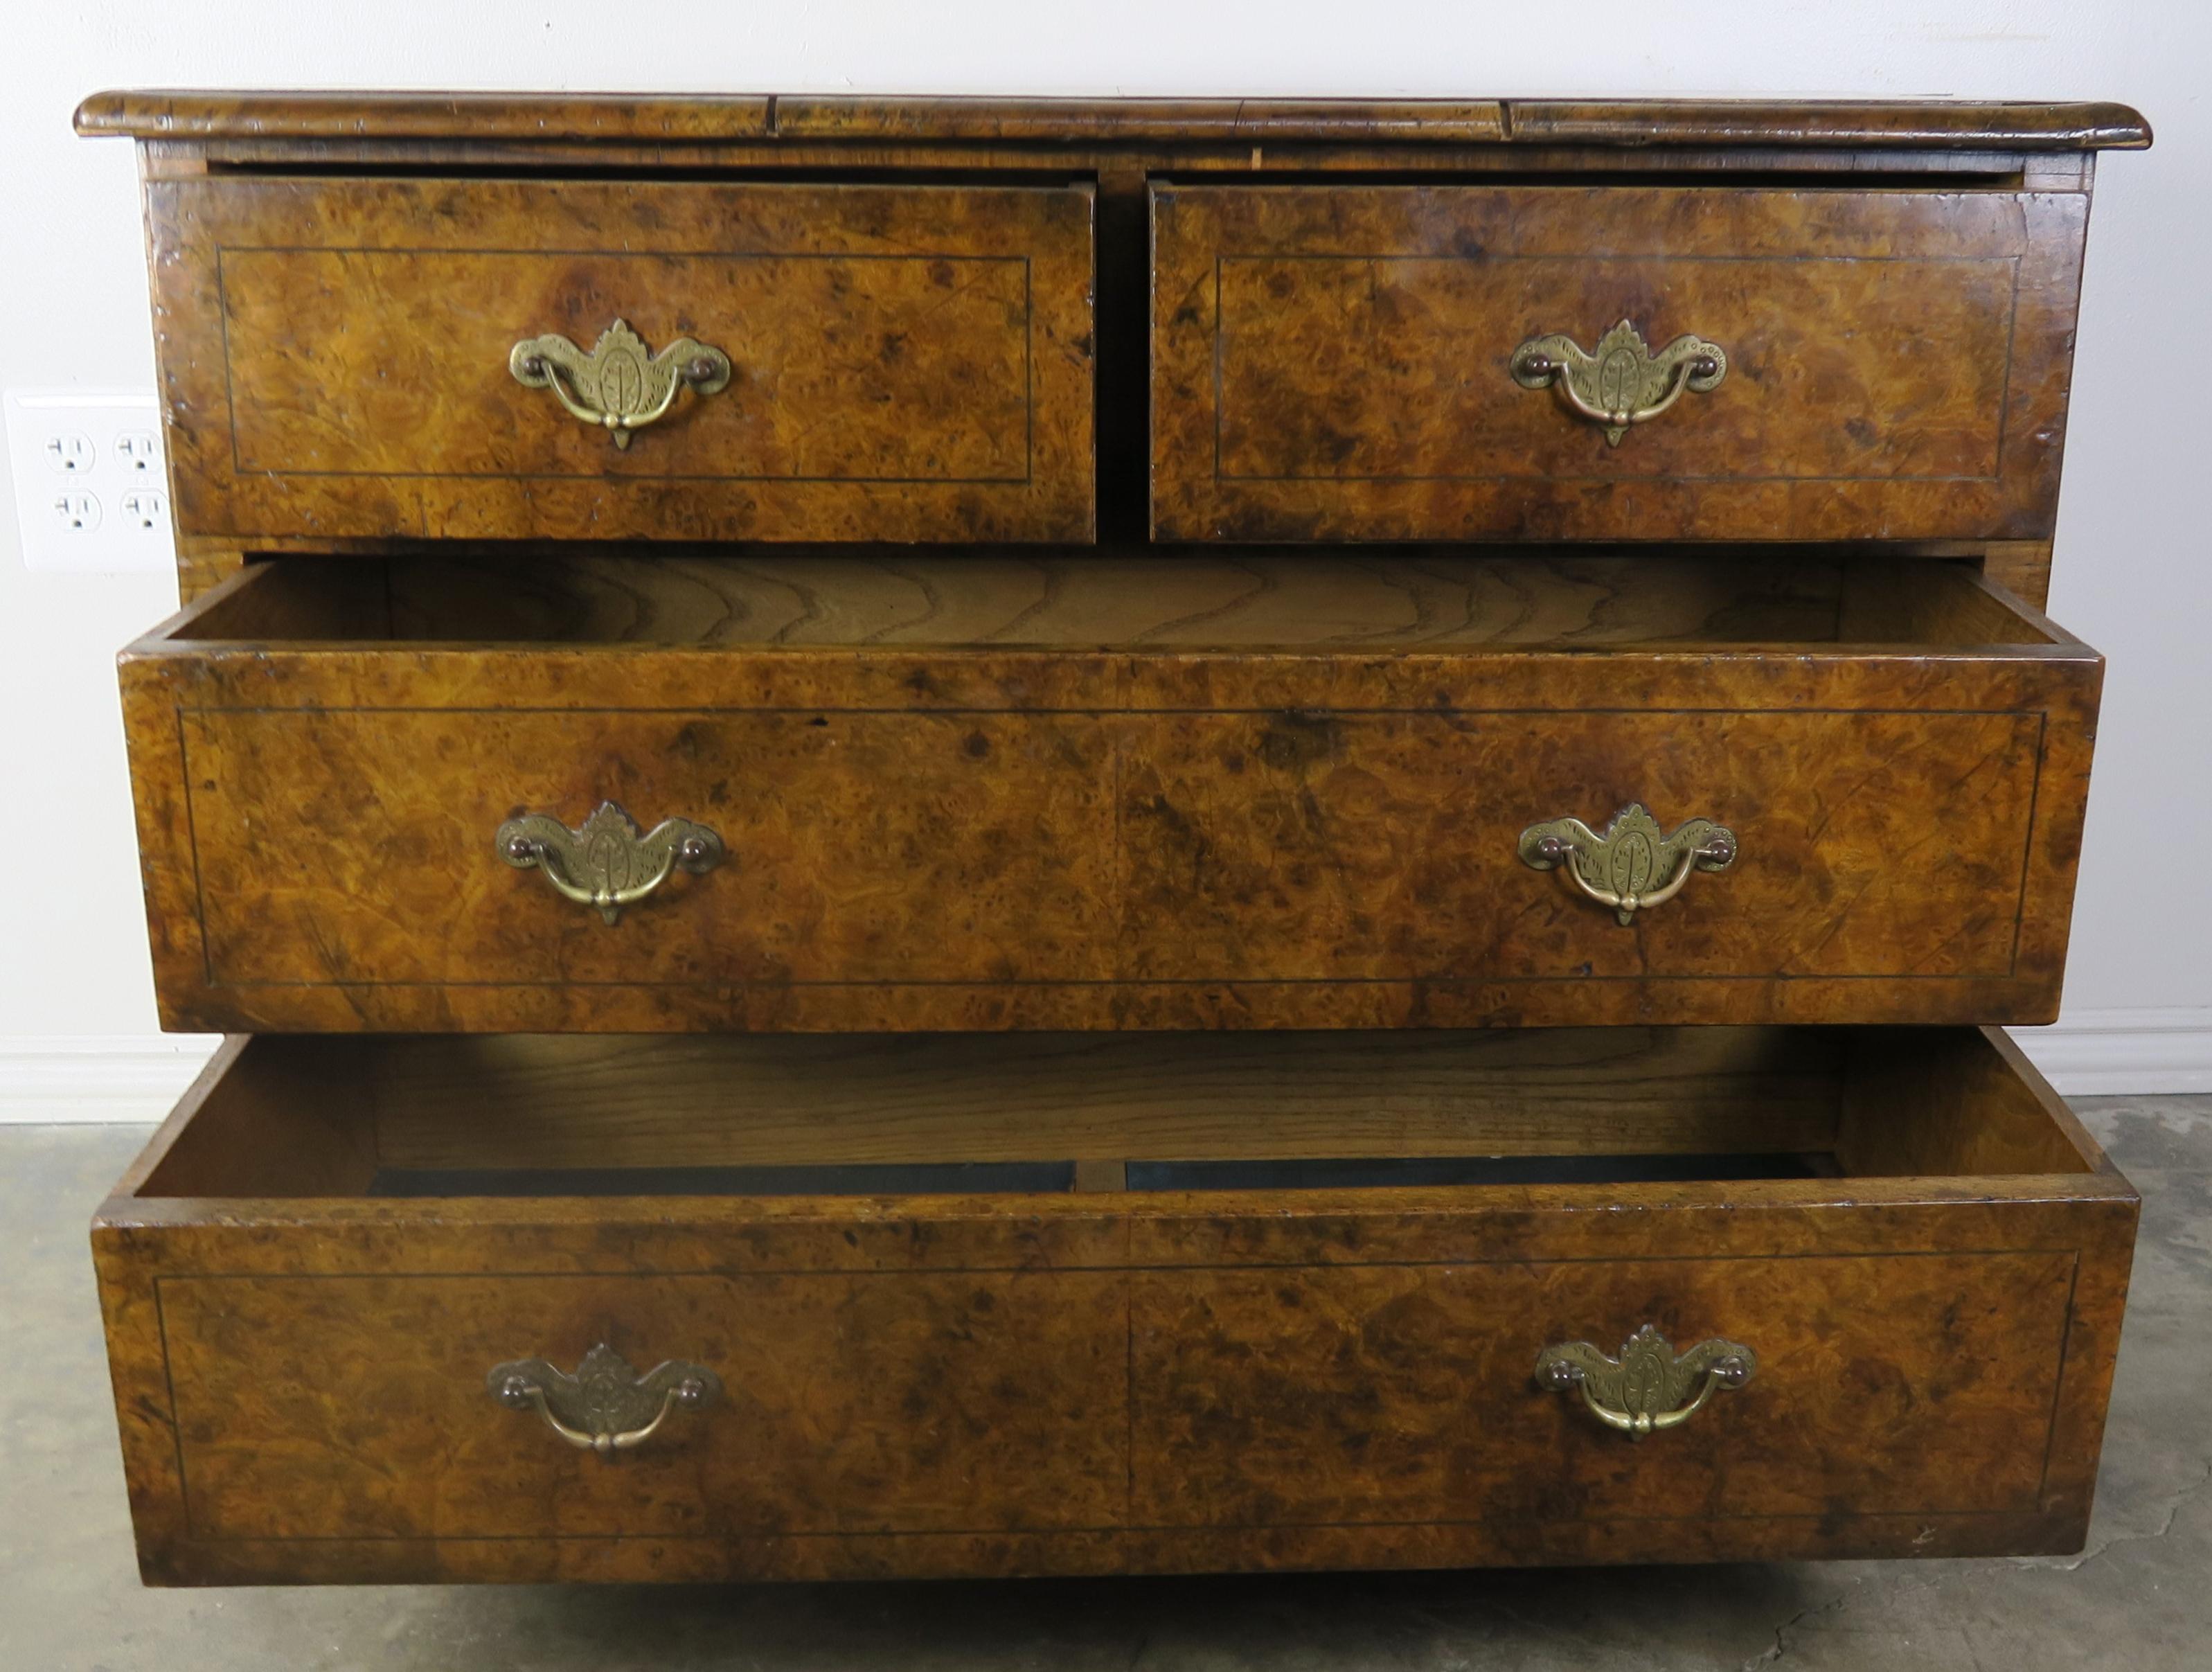 19th century English oyster veneered chest of drawers. Brass handles.